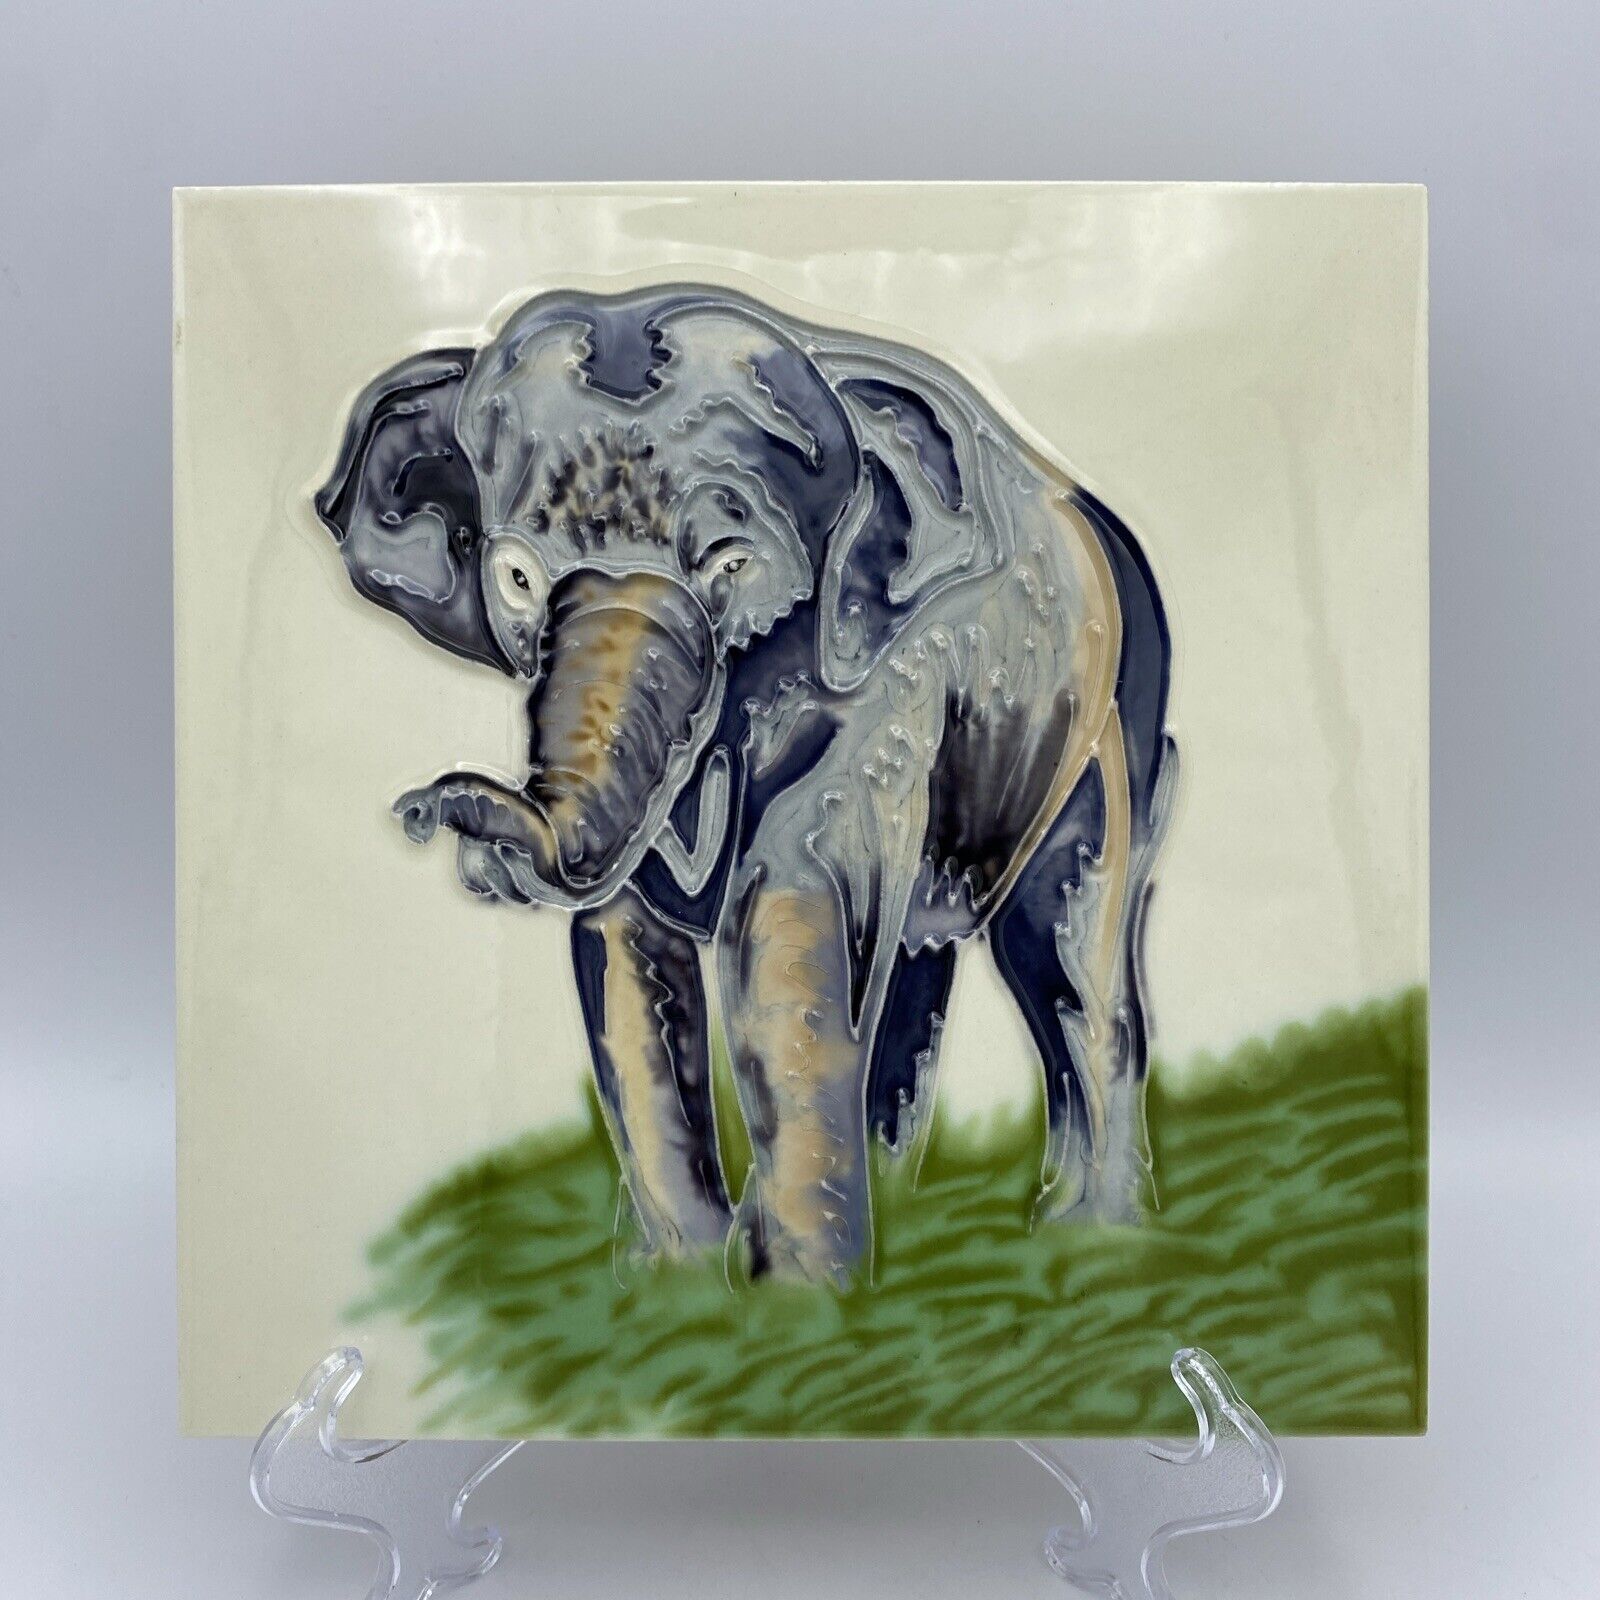 Elephant Hand Painted Ceramic Art Tile 8x8 inches Houston Zoo Matted Plaque 2007